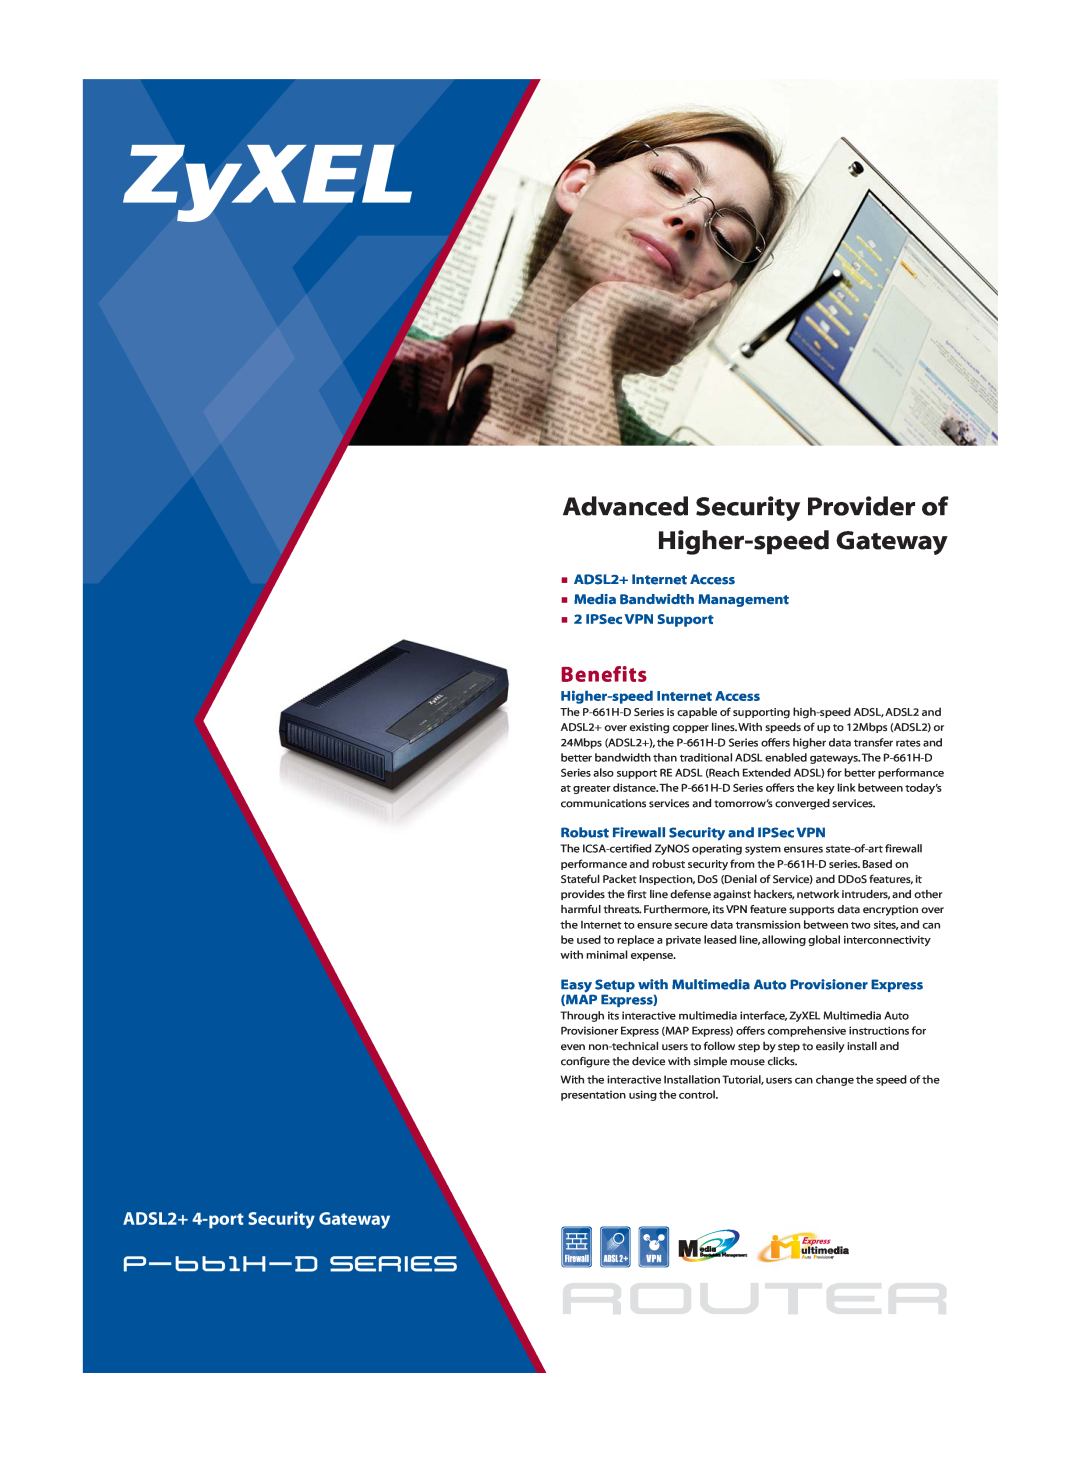 ZyXEL Communications P-661H-D manual Benefits, router, Advanced Security Provider of Higher-speed Gateway, p-661h-d series 